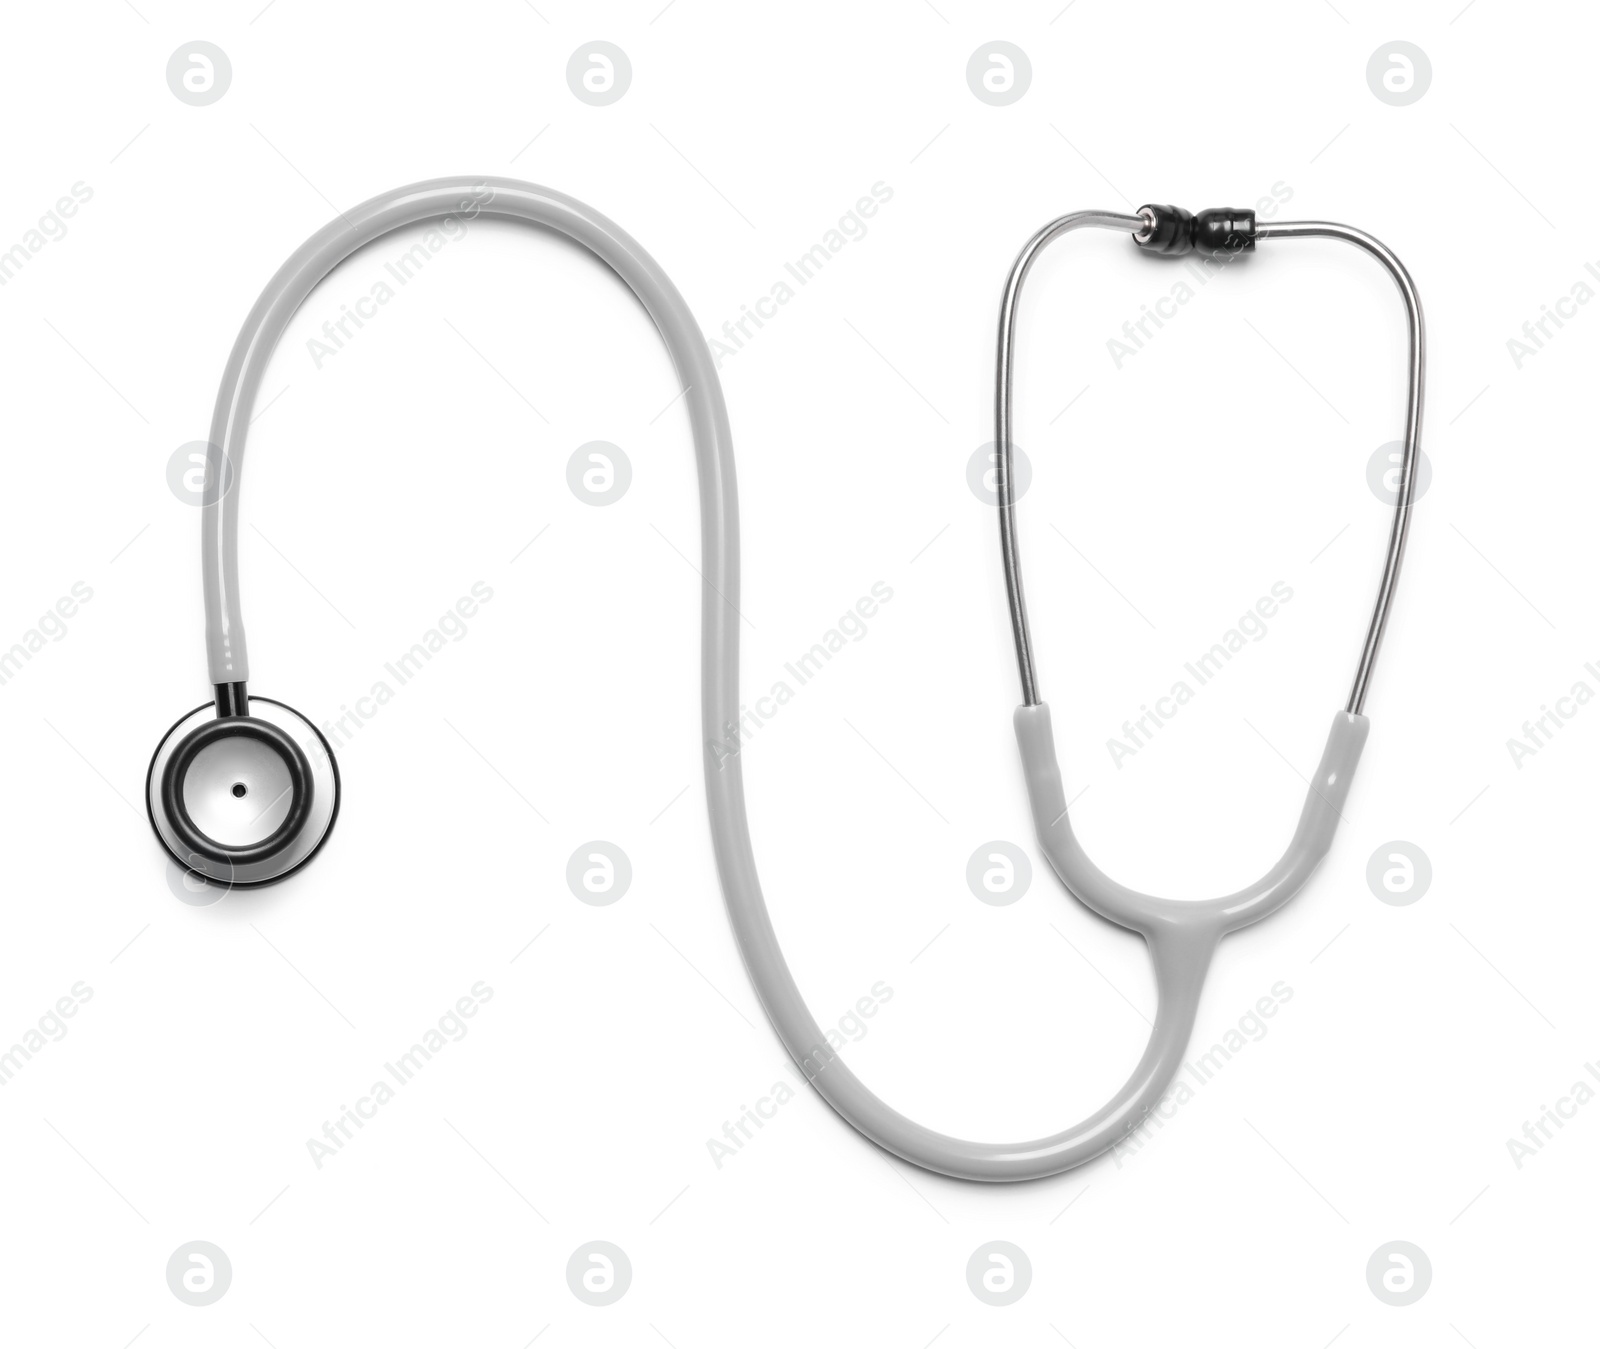 Photo of Modern stethoscope on white background, top view